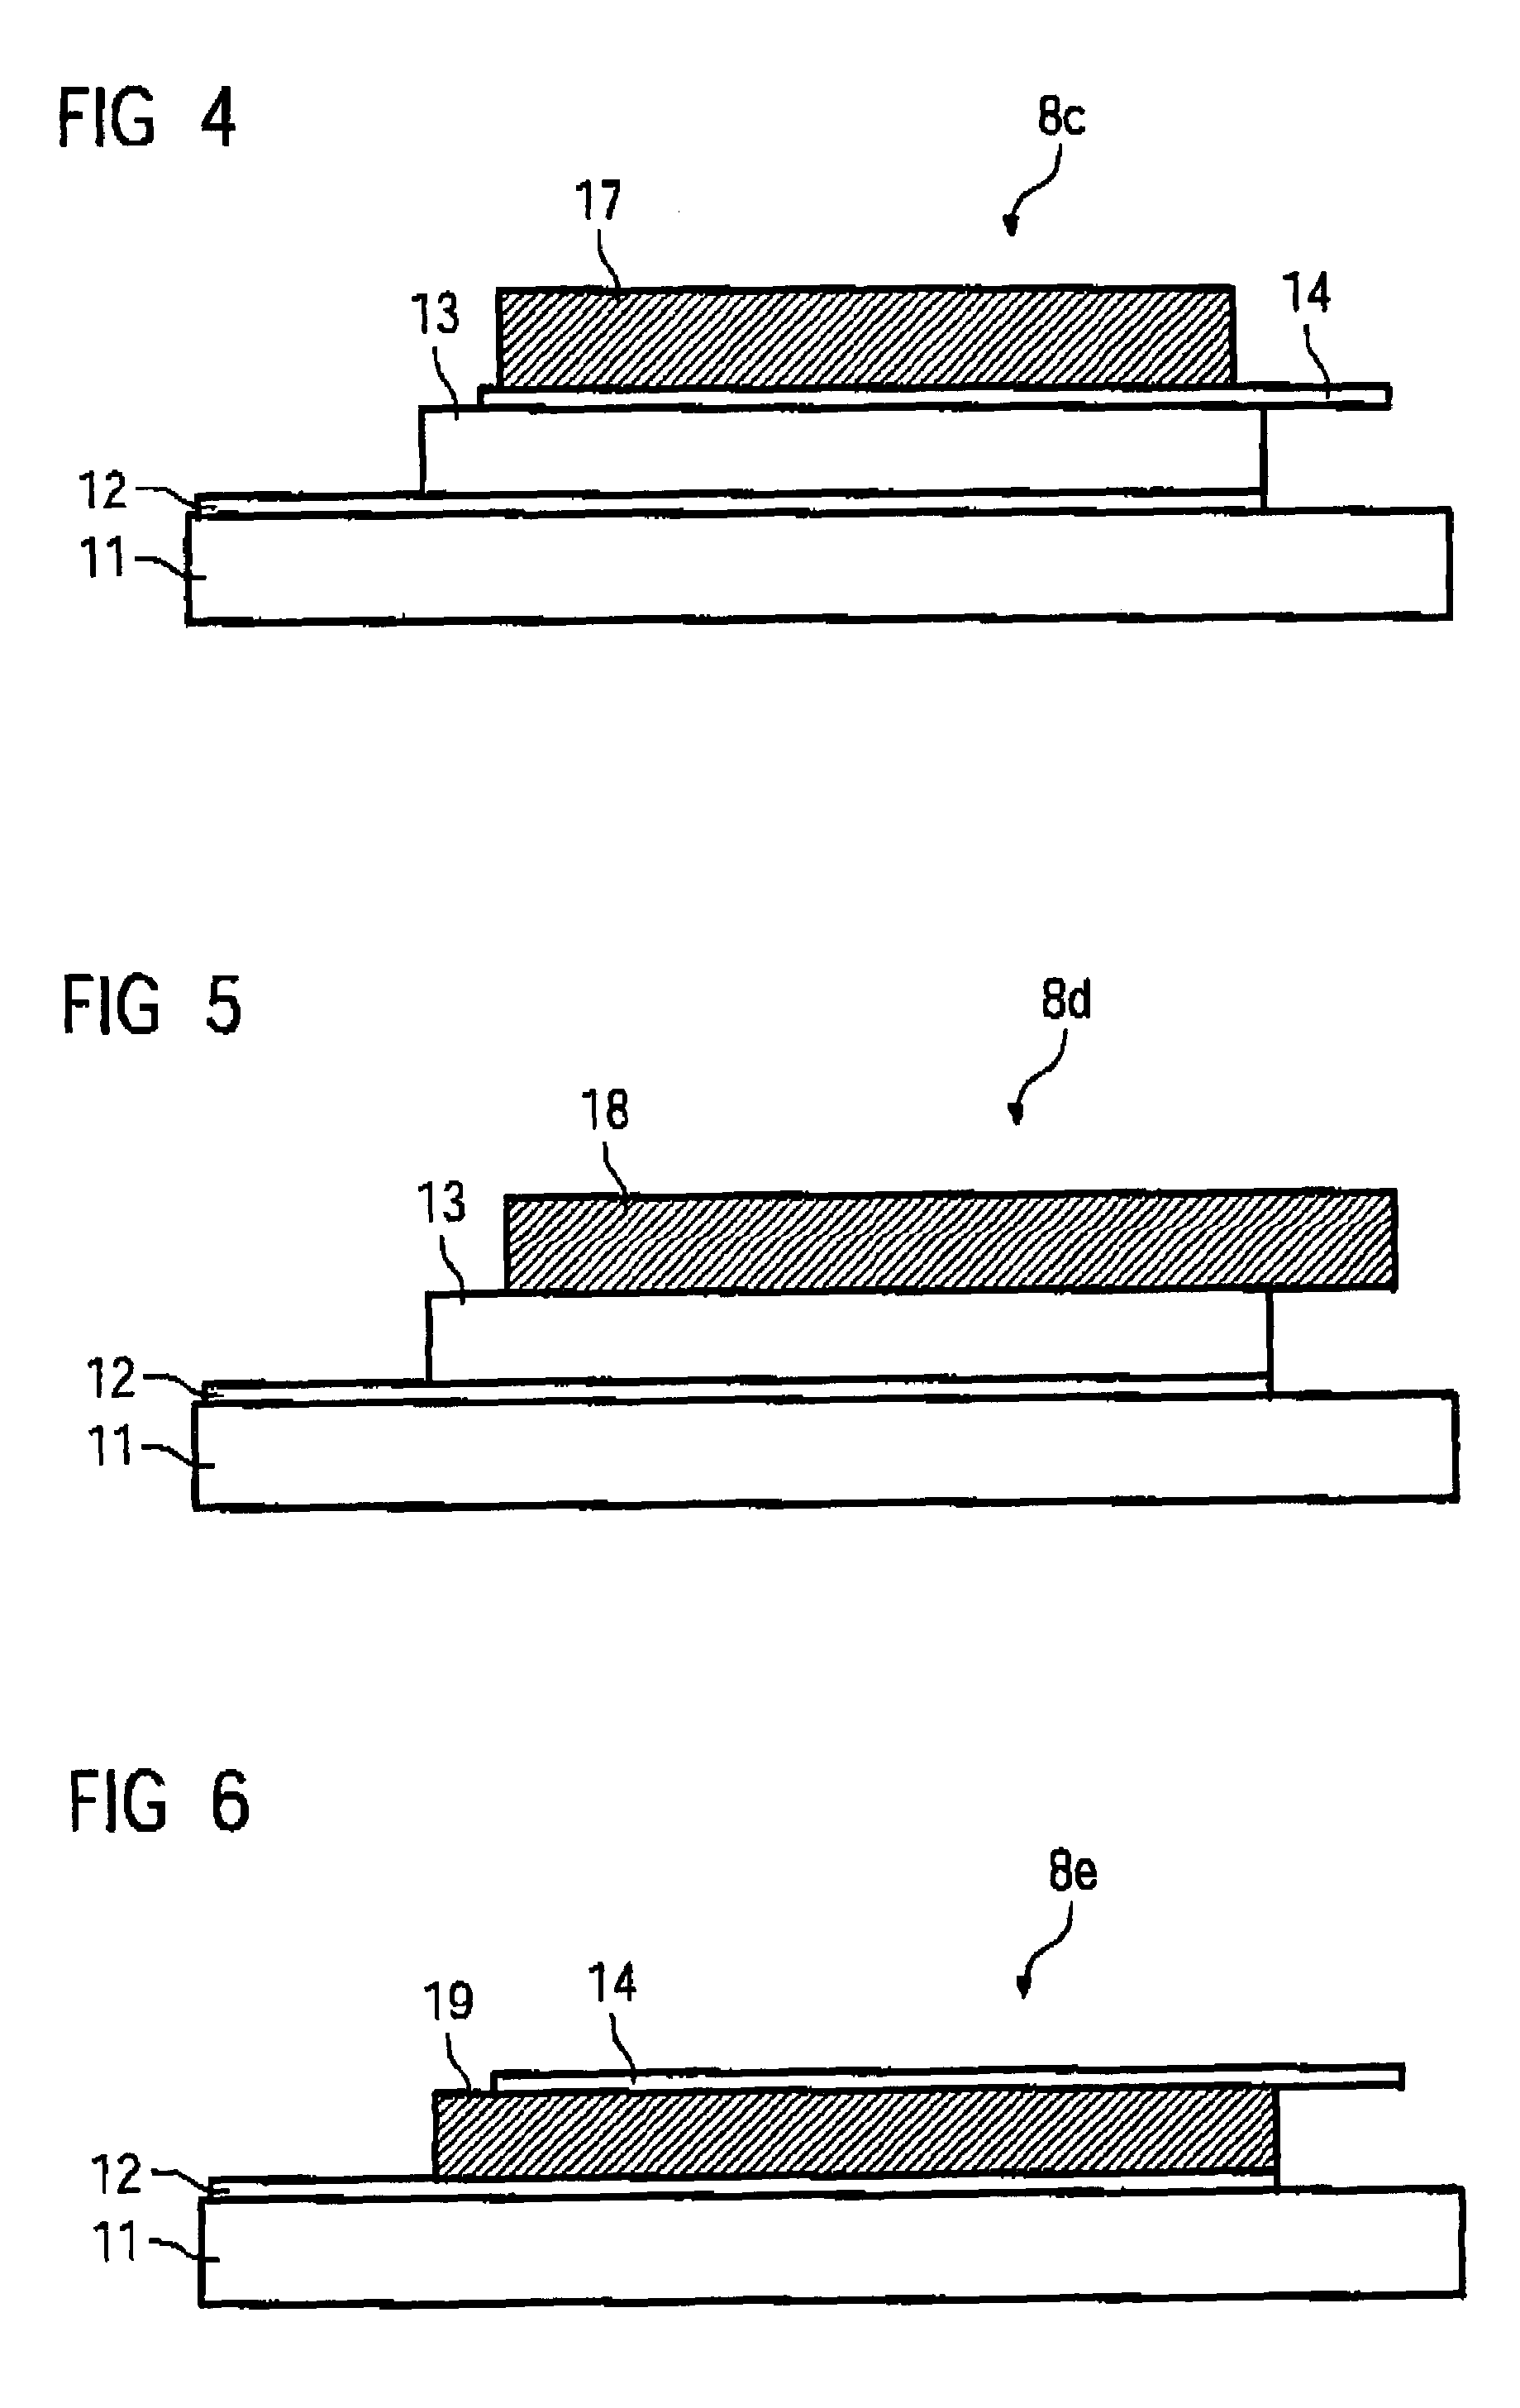 Device to measure a radiation dose